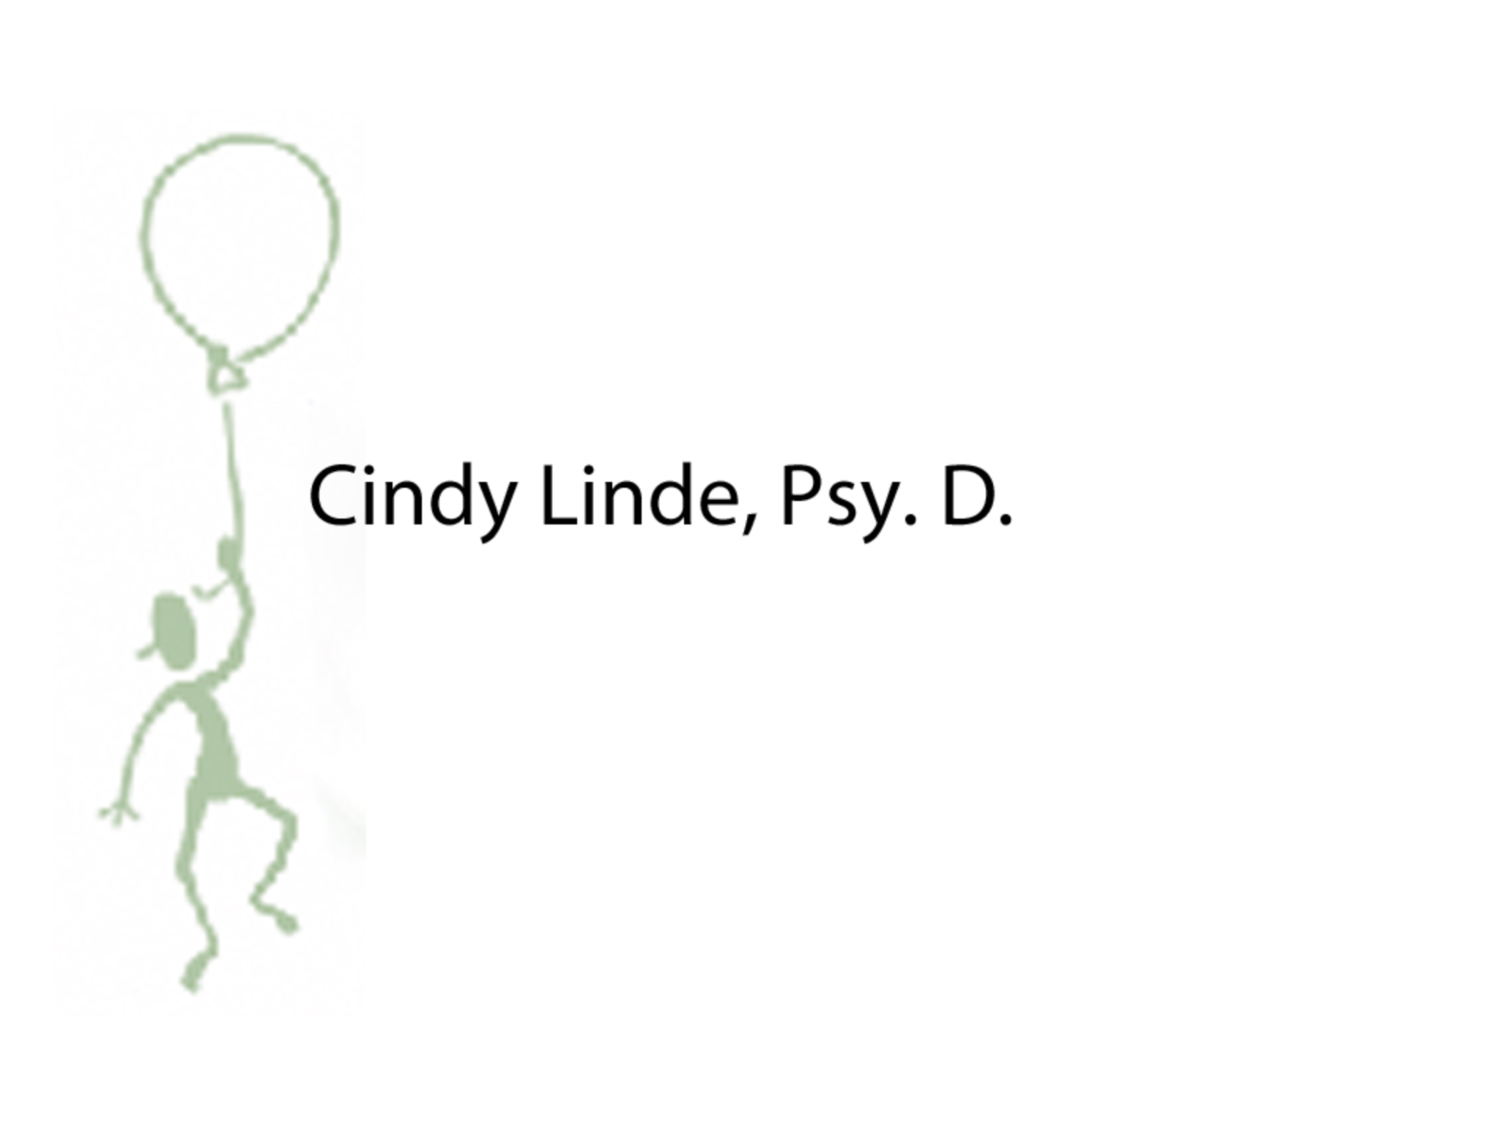 Mount Kisco Therapy | Therapy for Adolescents, Young Adults, Adults and Couples | Dr. Cindy Linde